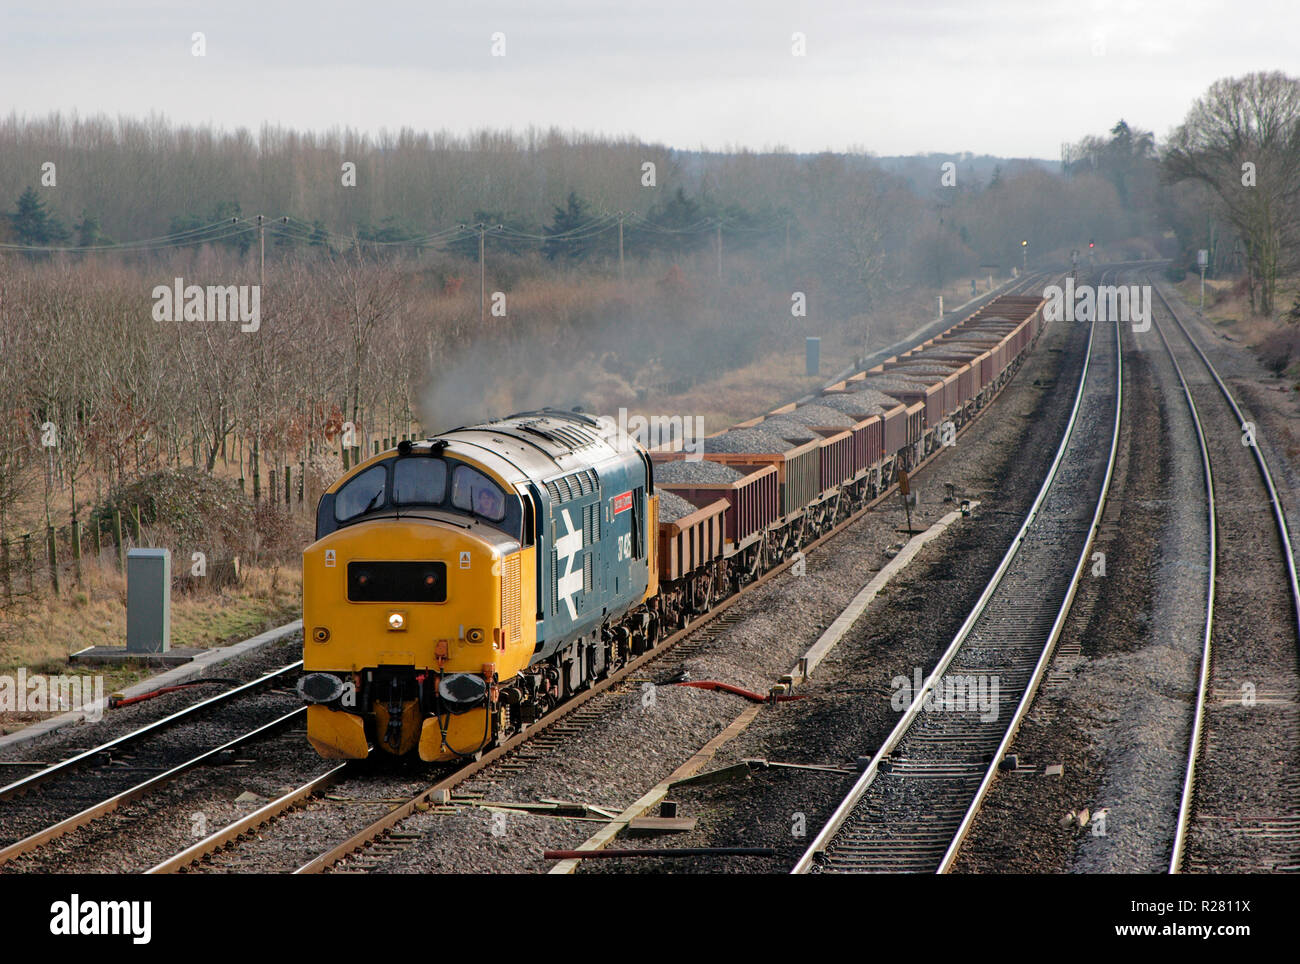 A class 37 diesel locomotive number 37425 in British Rail large logo livery working a loaded ballast train at Lower Basildon. Stock Photo